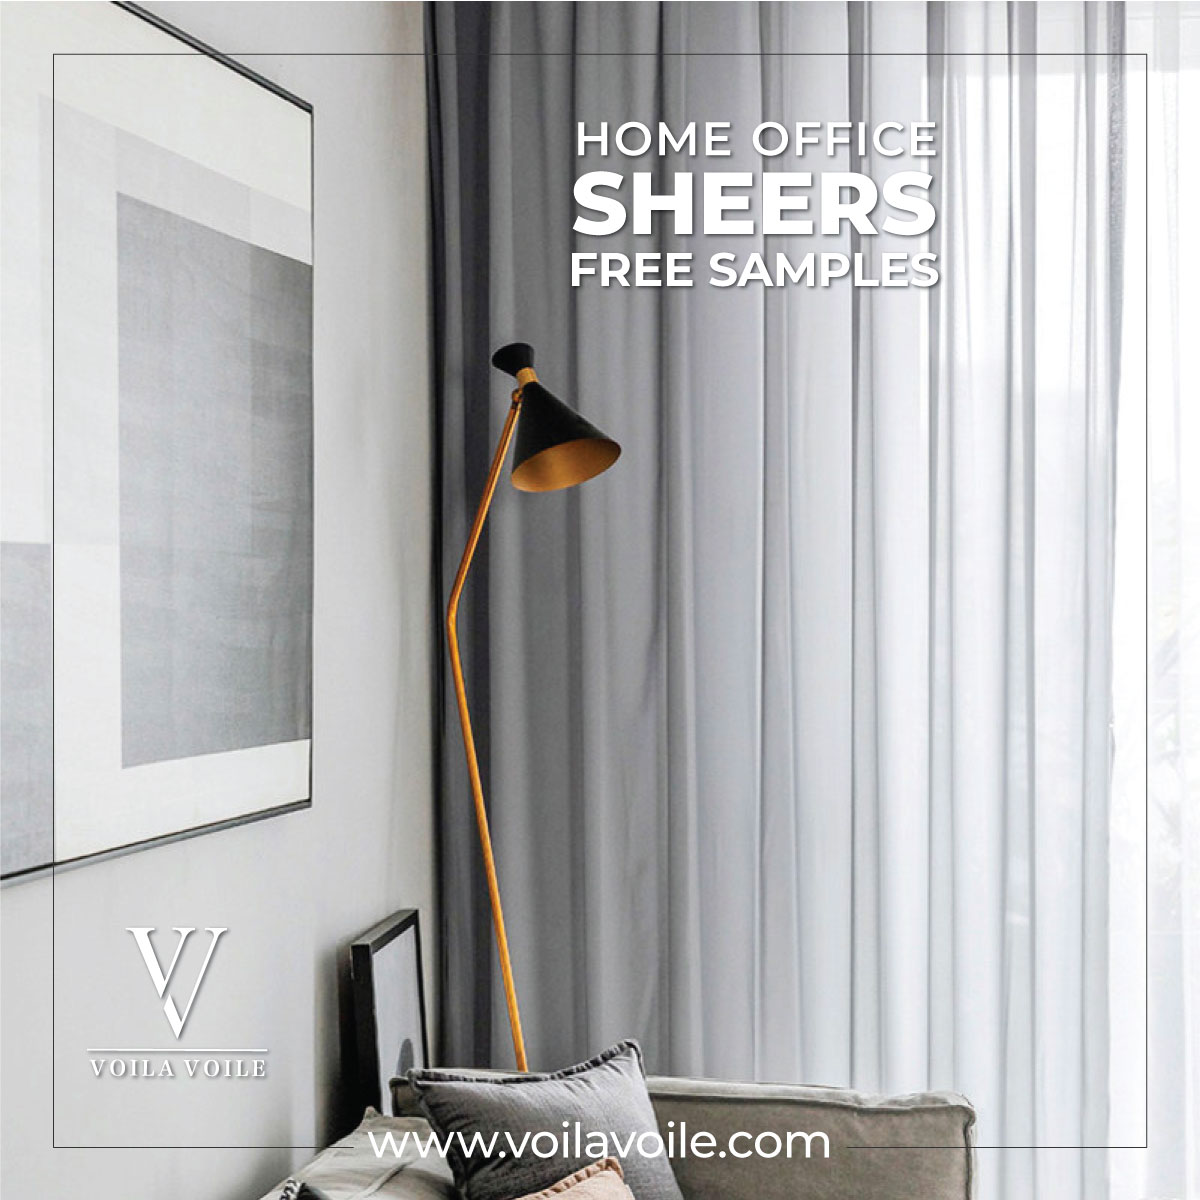 Home Office Curtains: Elevating Your Workspace with Made To Measure Voile Curtains